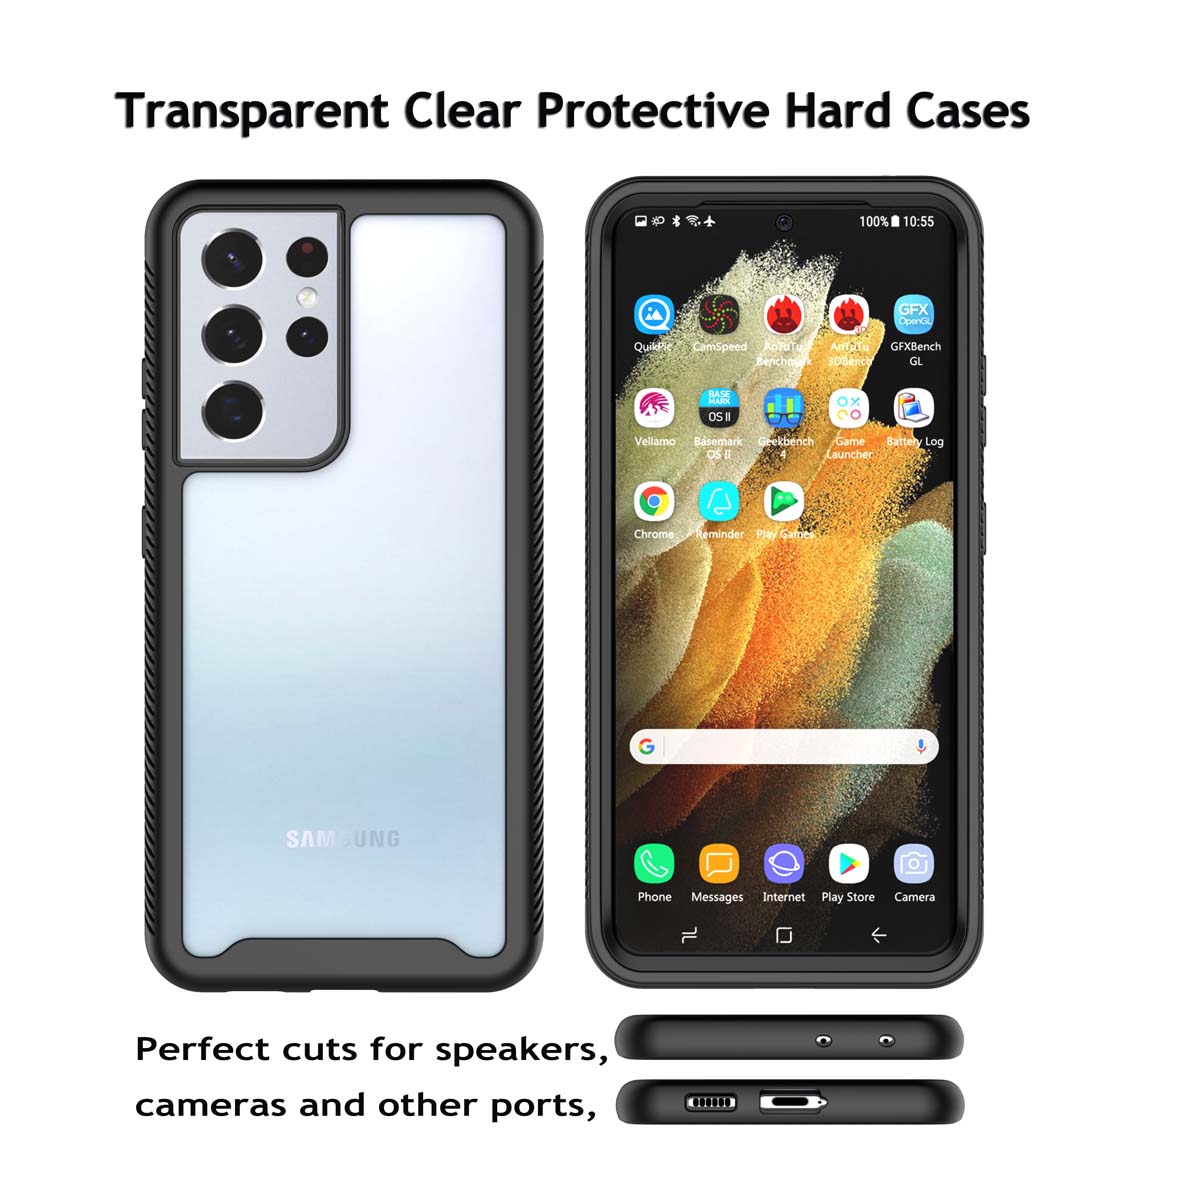 Galaxy S21 Ultra 5G Case, Phone Case for 2020 Galaxy S21 Ultra 6.8", Njjex Hard Plastic Full-Body Rugged Transparent Clear Back Bumper Case Cover for Samsung Galaxy S21 Ultra -Black - image 3 of 12